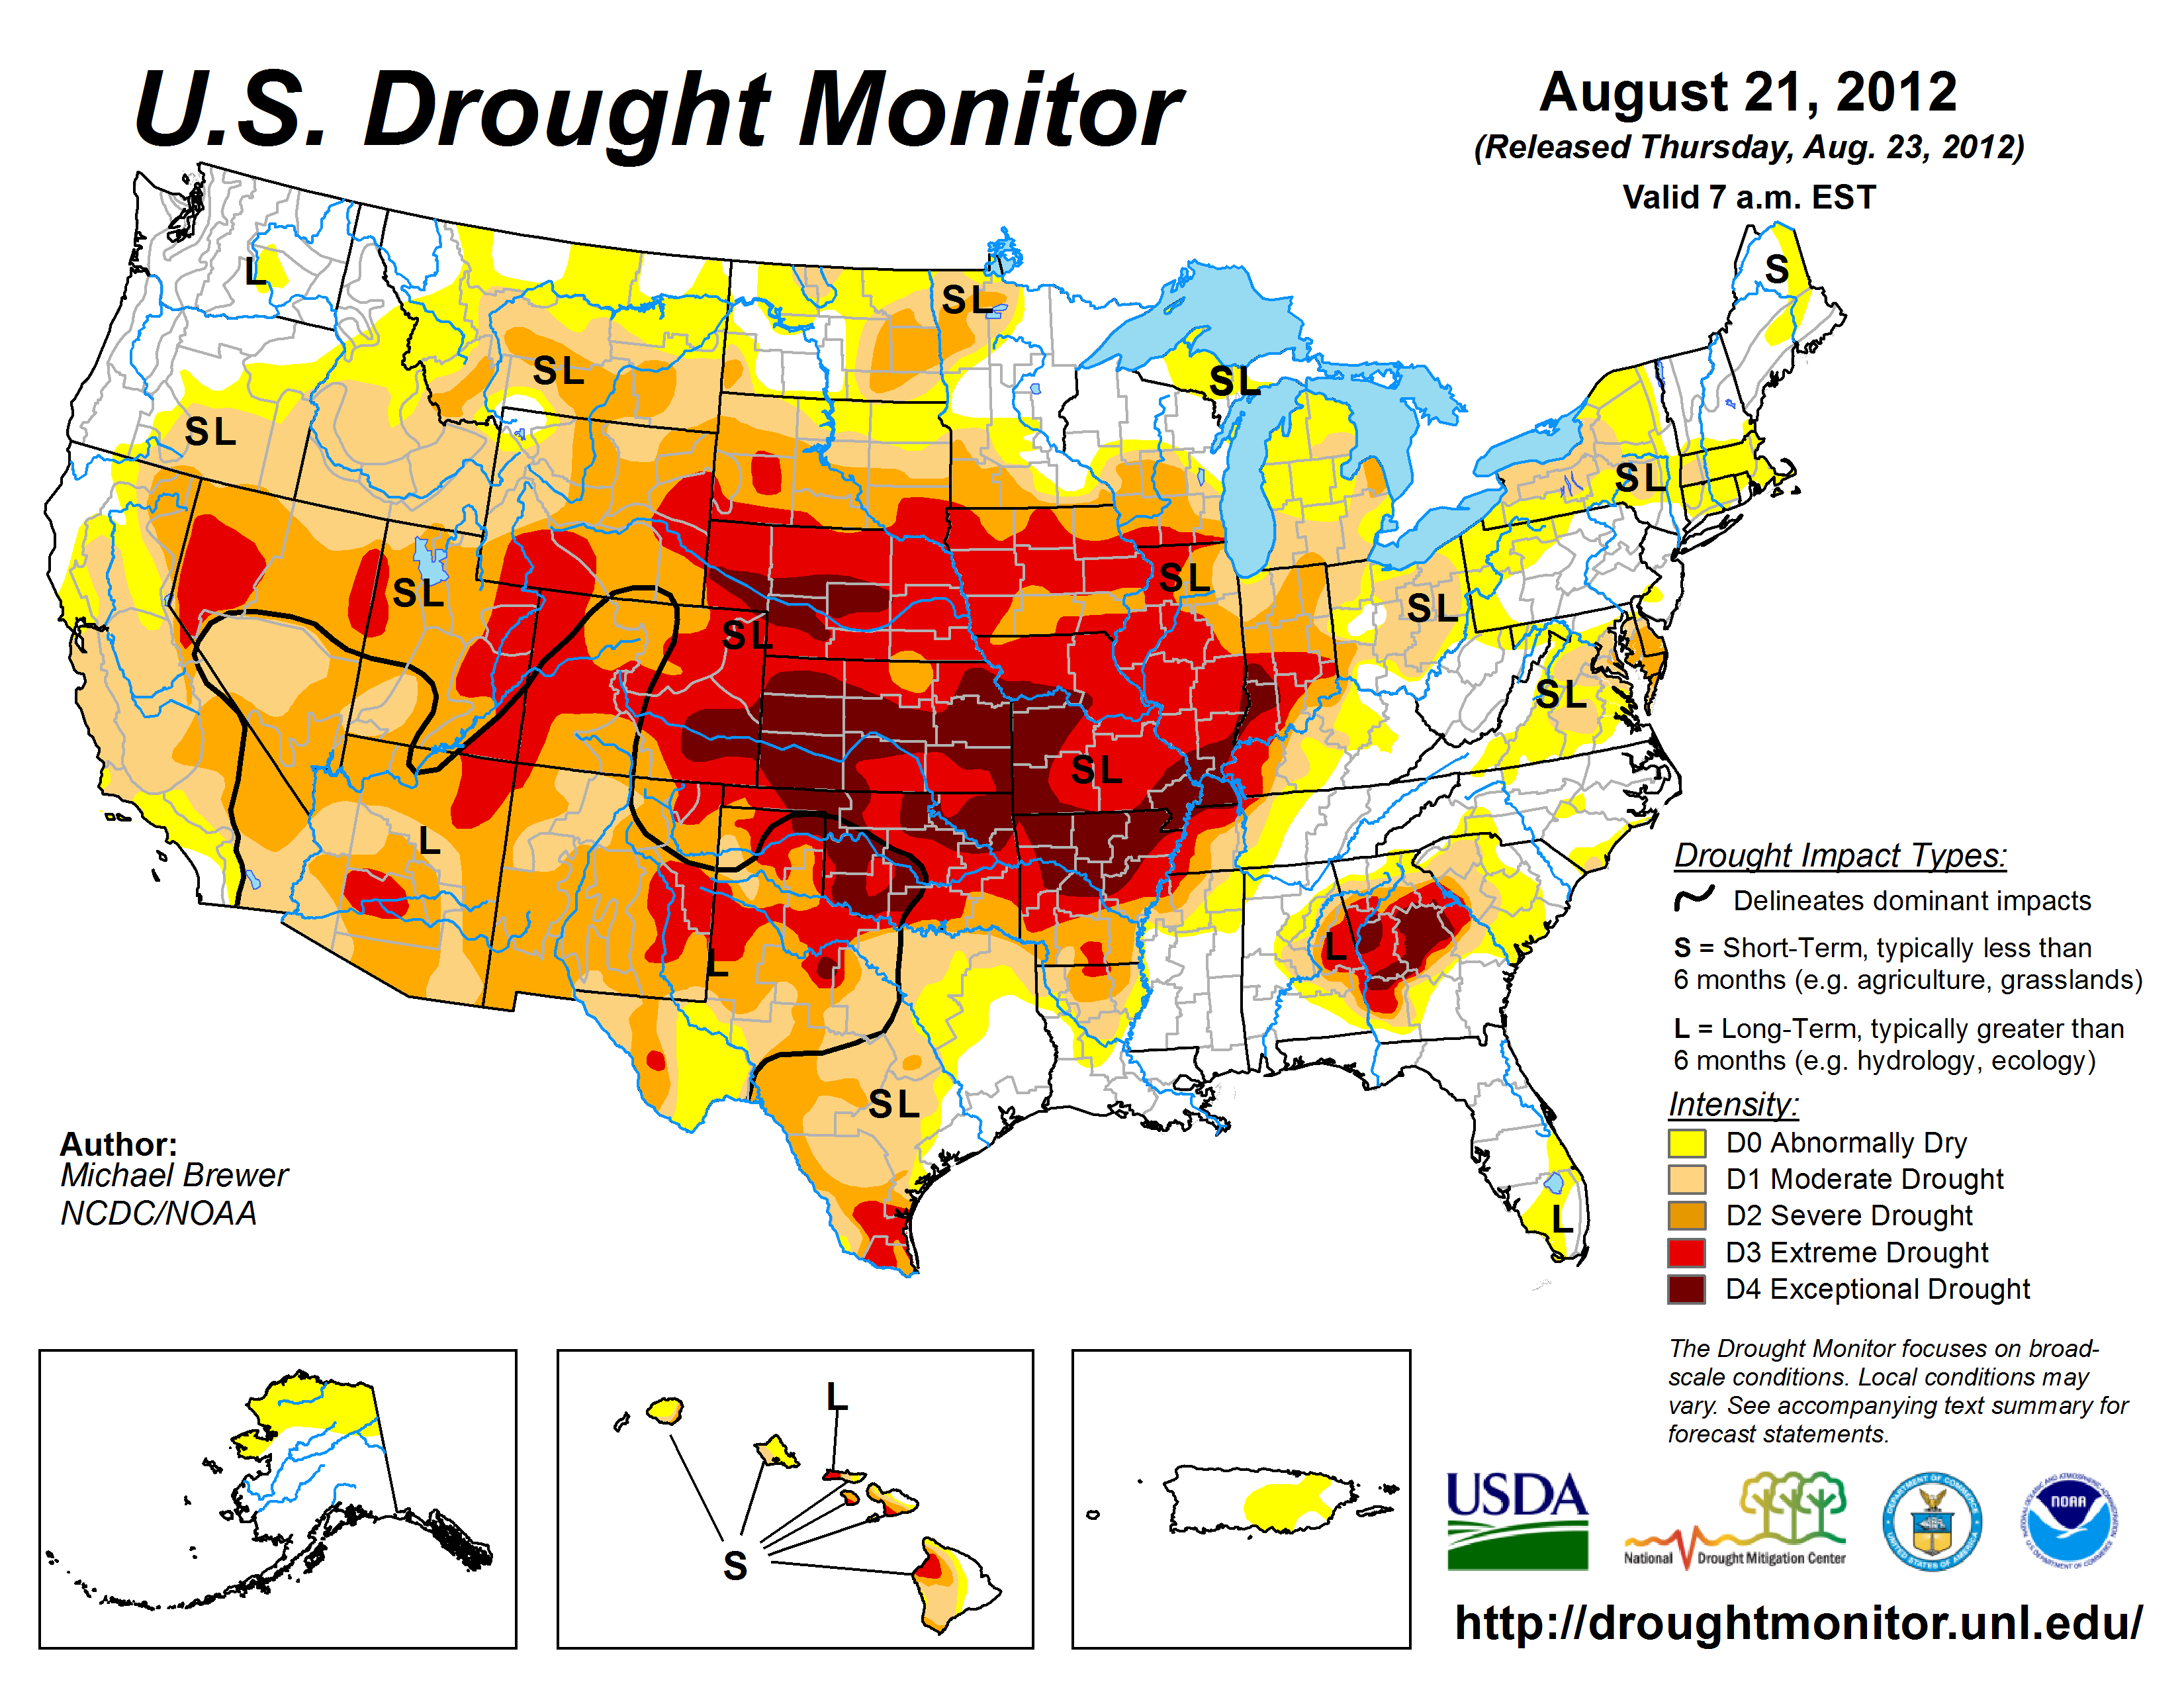 U.S. Drought Monitor for Aug. 21, 2012